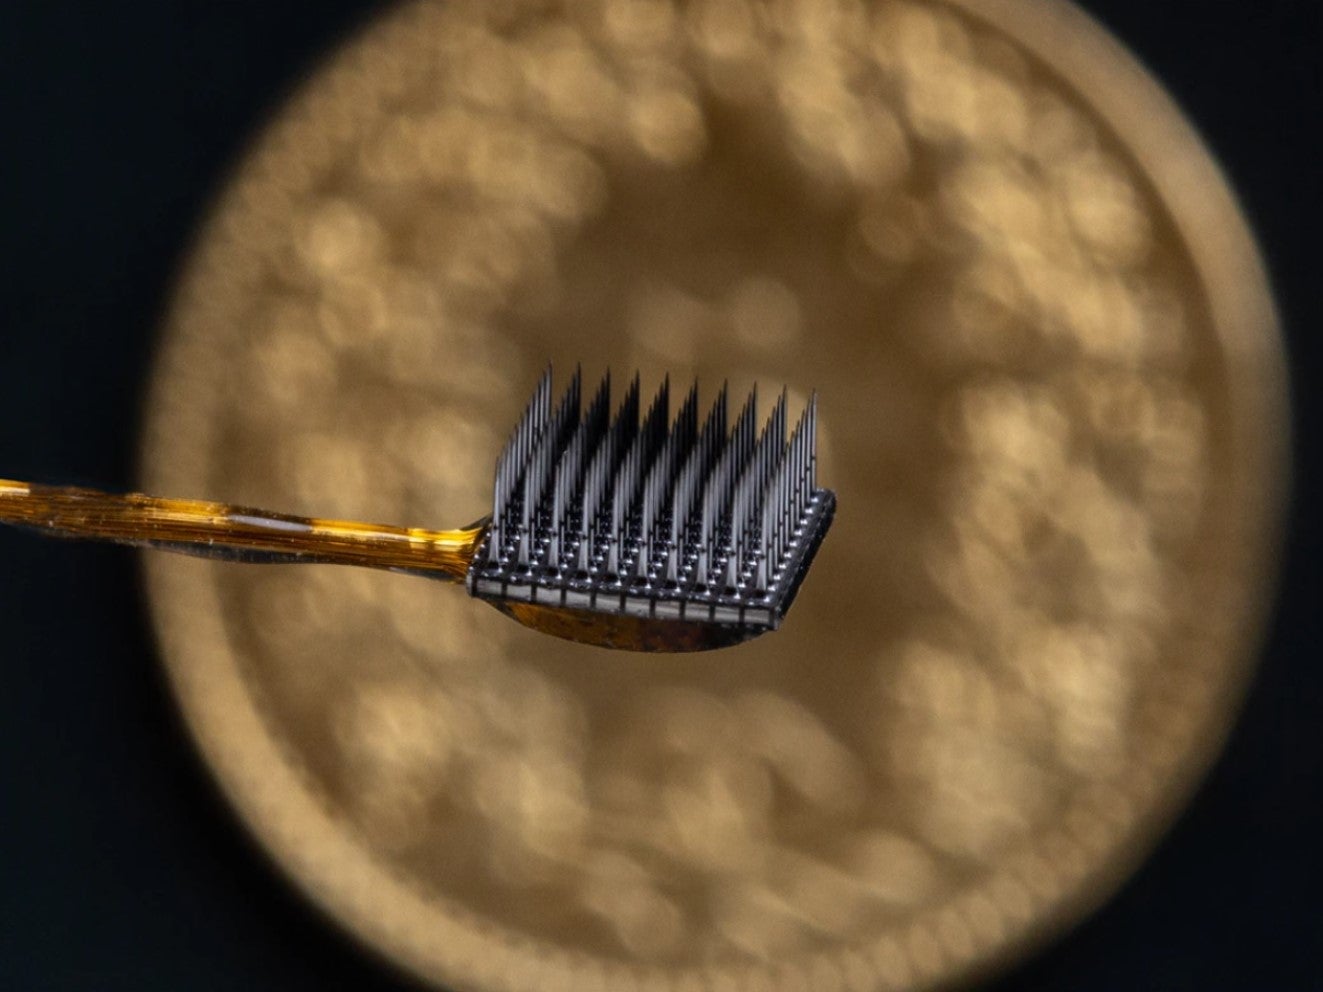 Two microelectrode arrays, each 3.2mm square, were inserted into the surface of the motor cortex in the frontal lobe of the brain